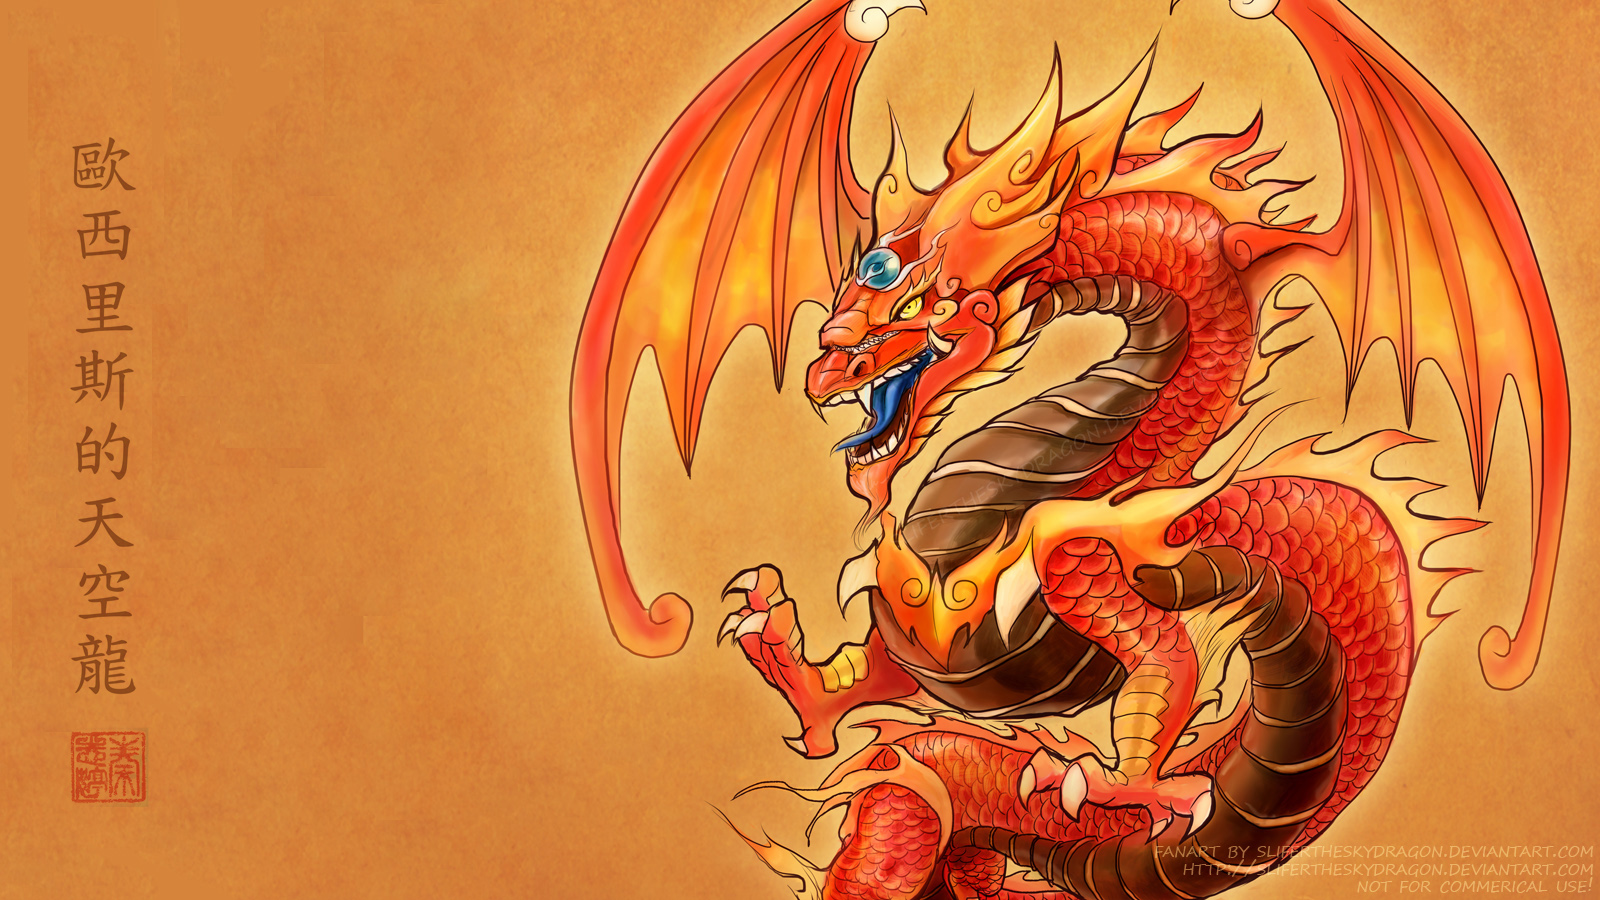  new Chinese Dragons desktop background Chinese Dragons wallpapers